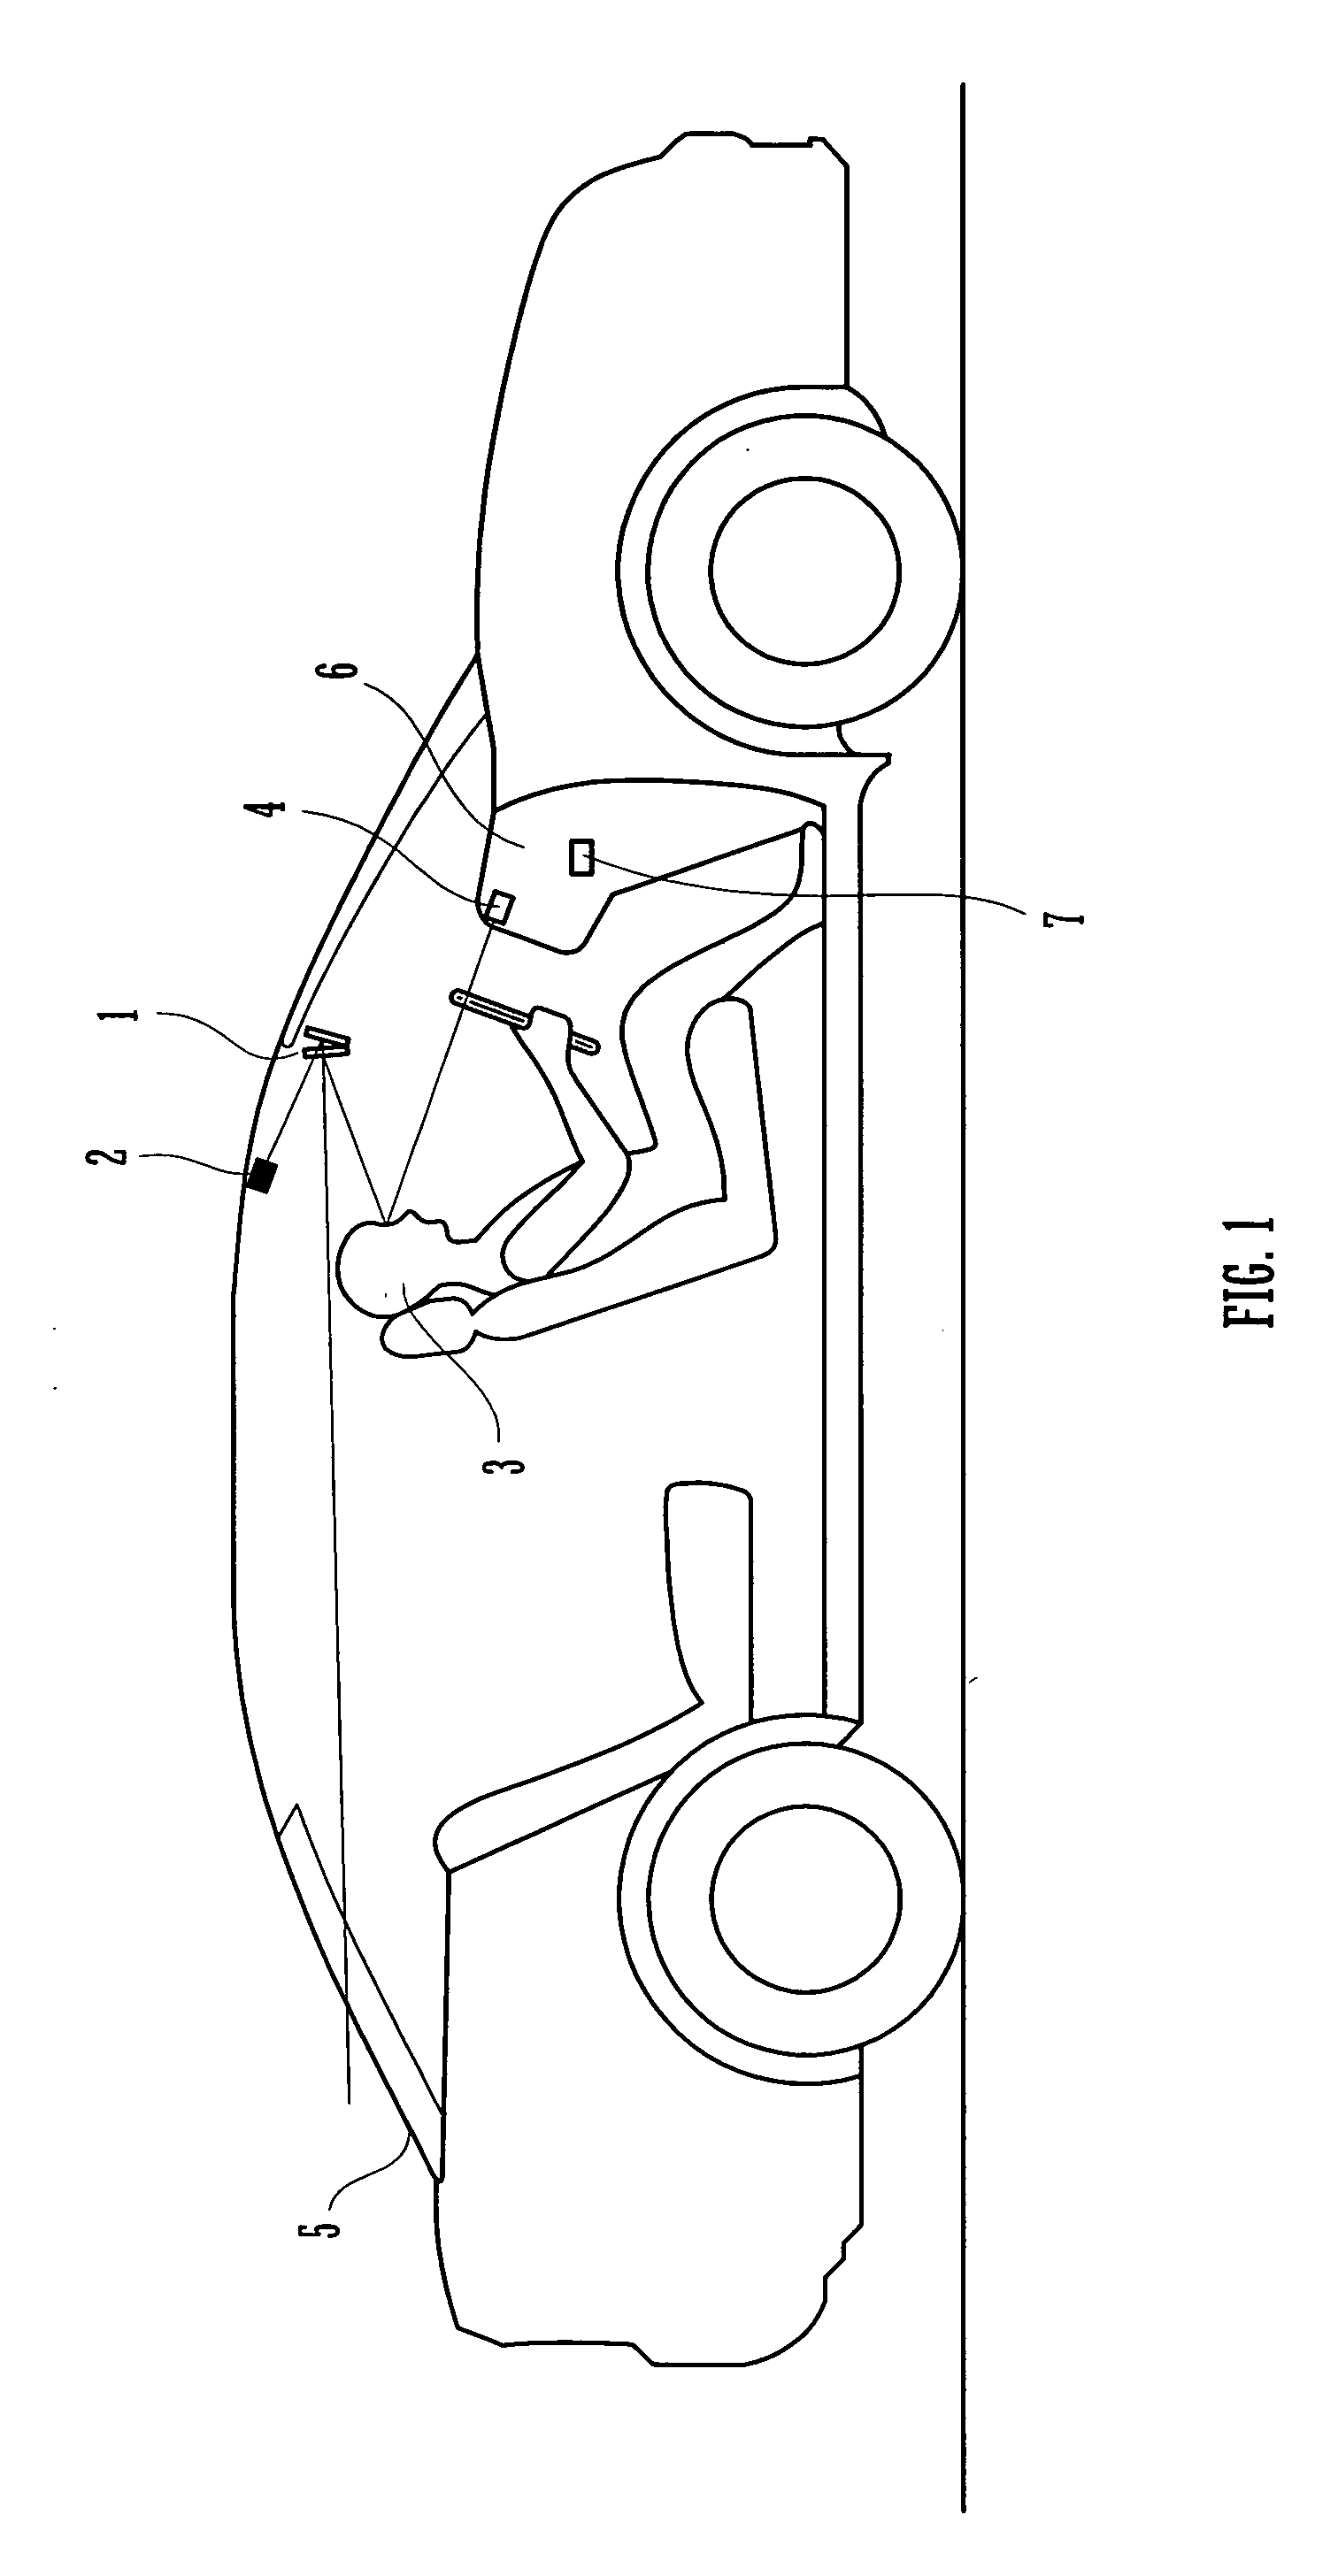 Image capturing apparatus and monitoring apparatus for vehicle driver